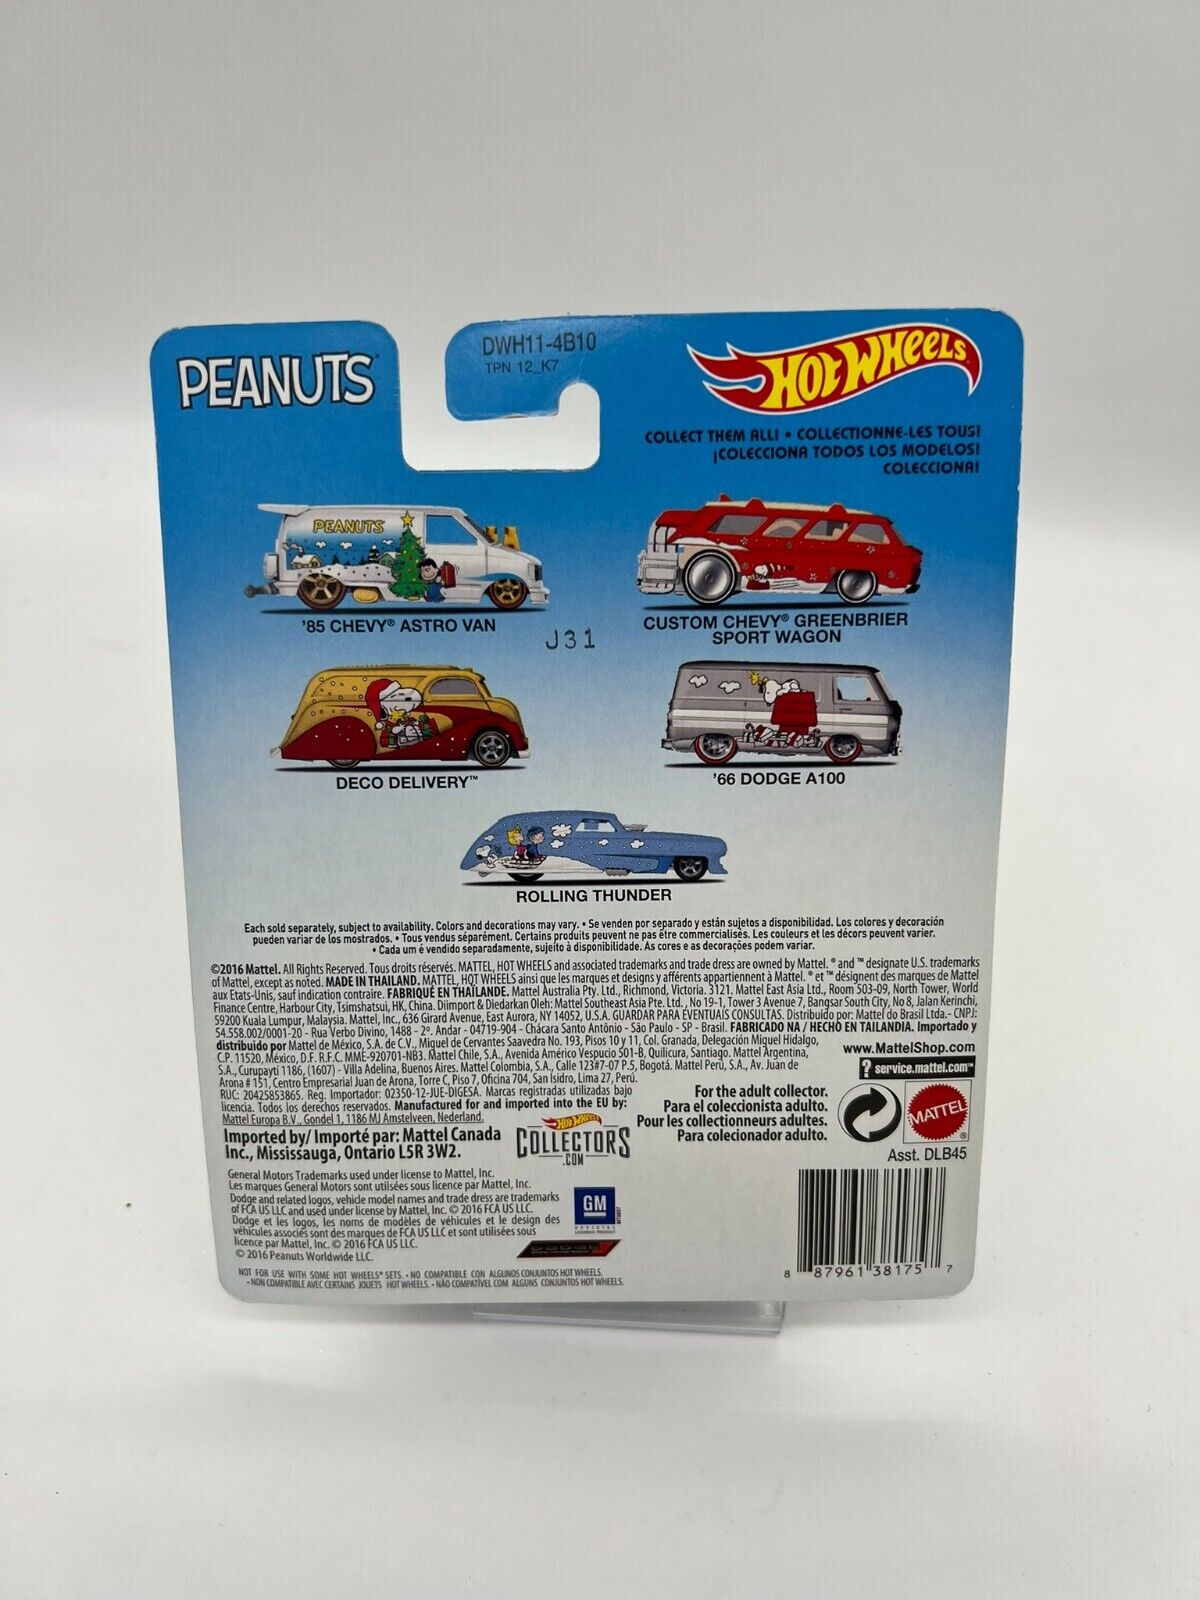 2016 DECO DELIVERY Linus Snoopy Hot Wheels Pop Culture PEANUTS Real Riders 1:64